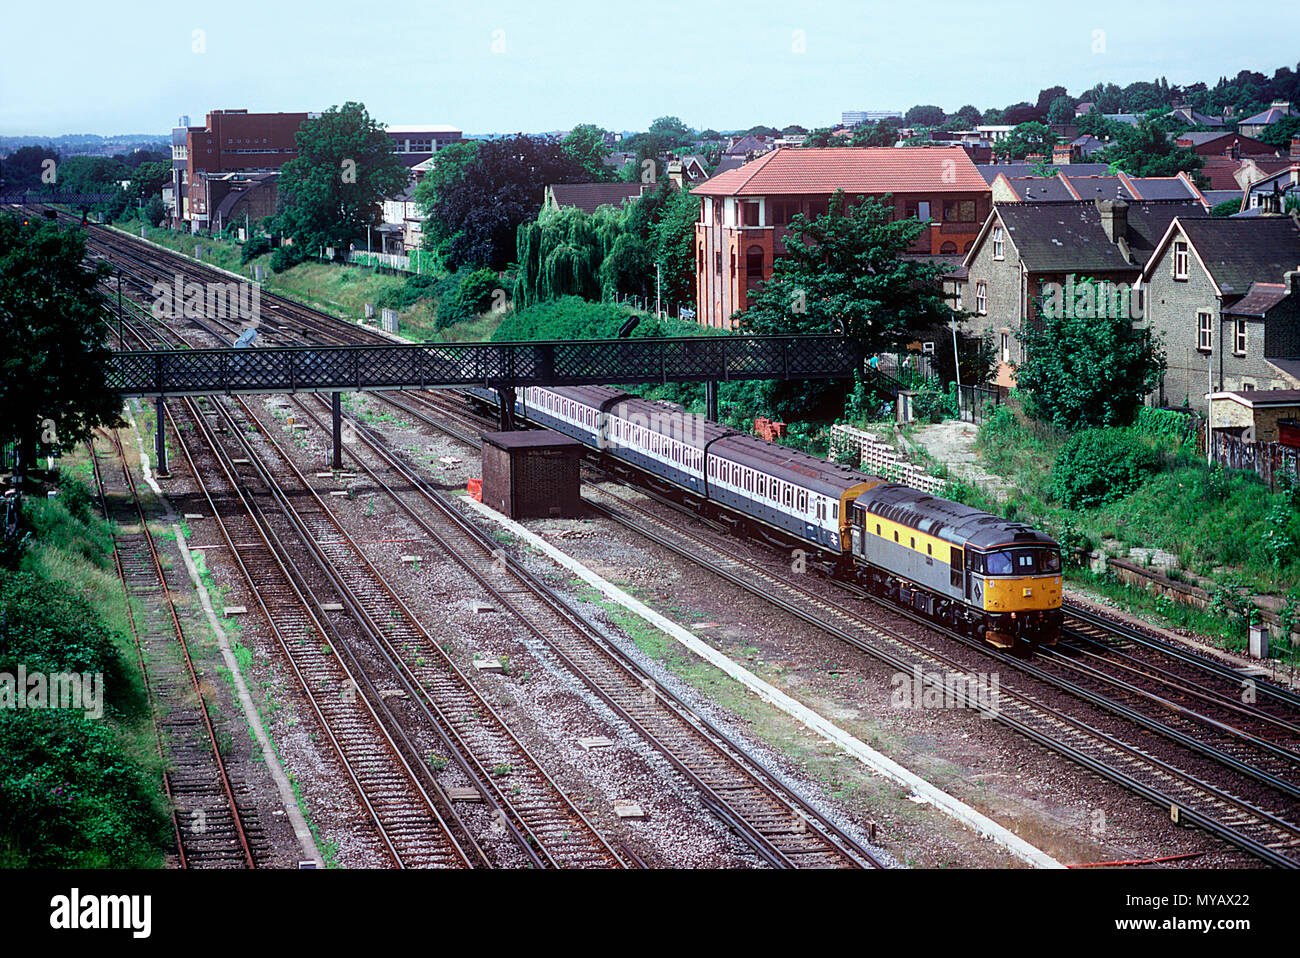 A class 33 diesel locomotive number 33019 heads towards Clapham Junction with departmental 4EPB unit number 930997 in tow at Wimbledon on the 10th July 1992. Stock Photo